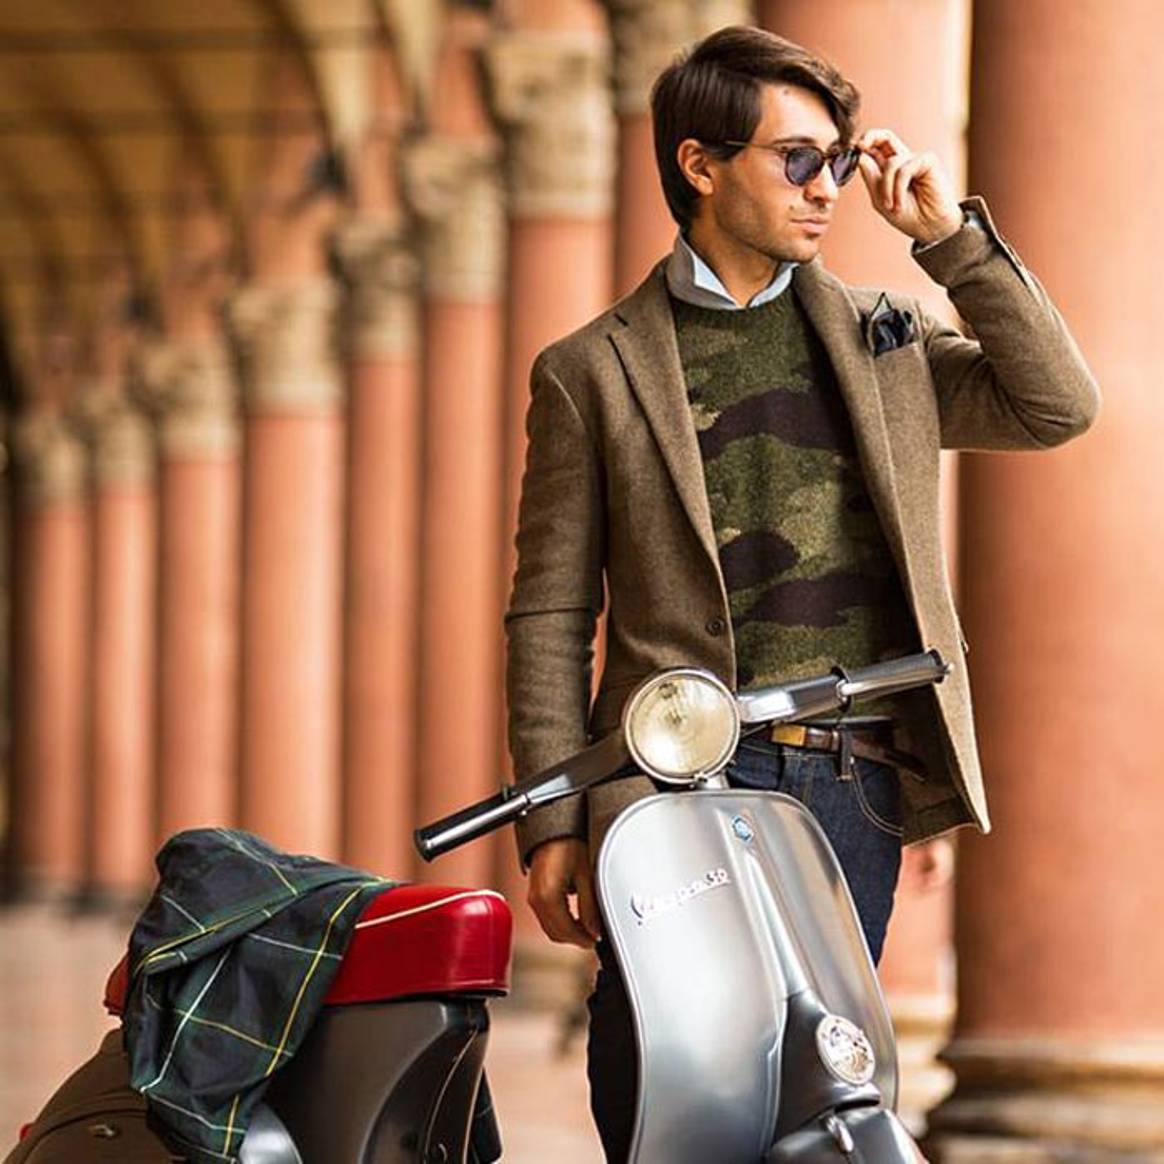 UK male shoppers are the main buyers of designer fashion